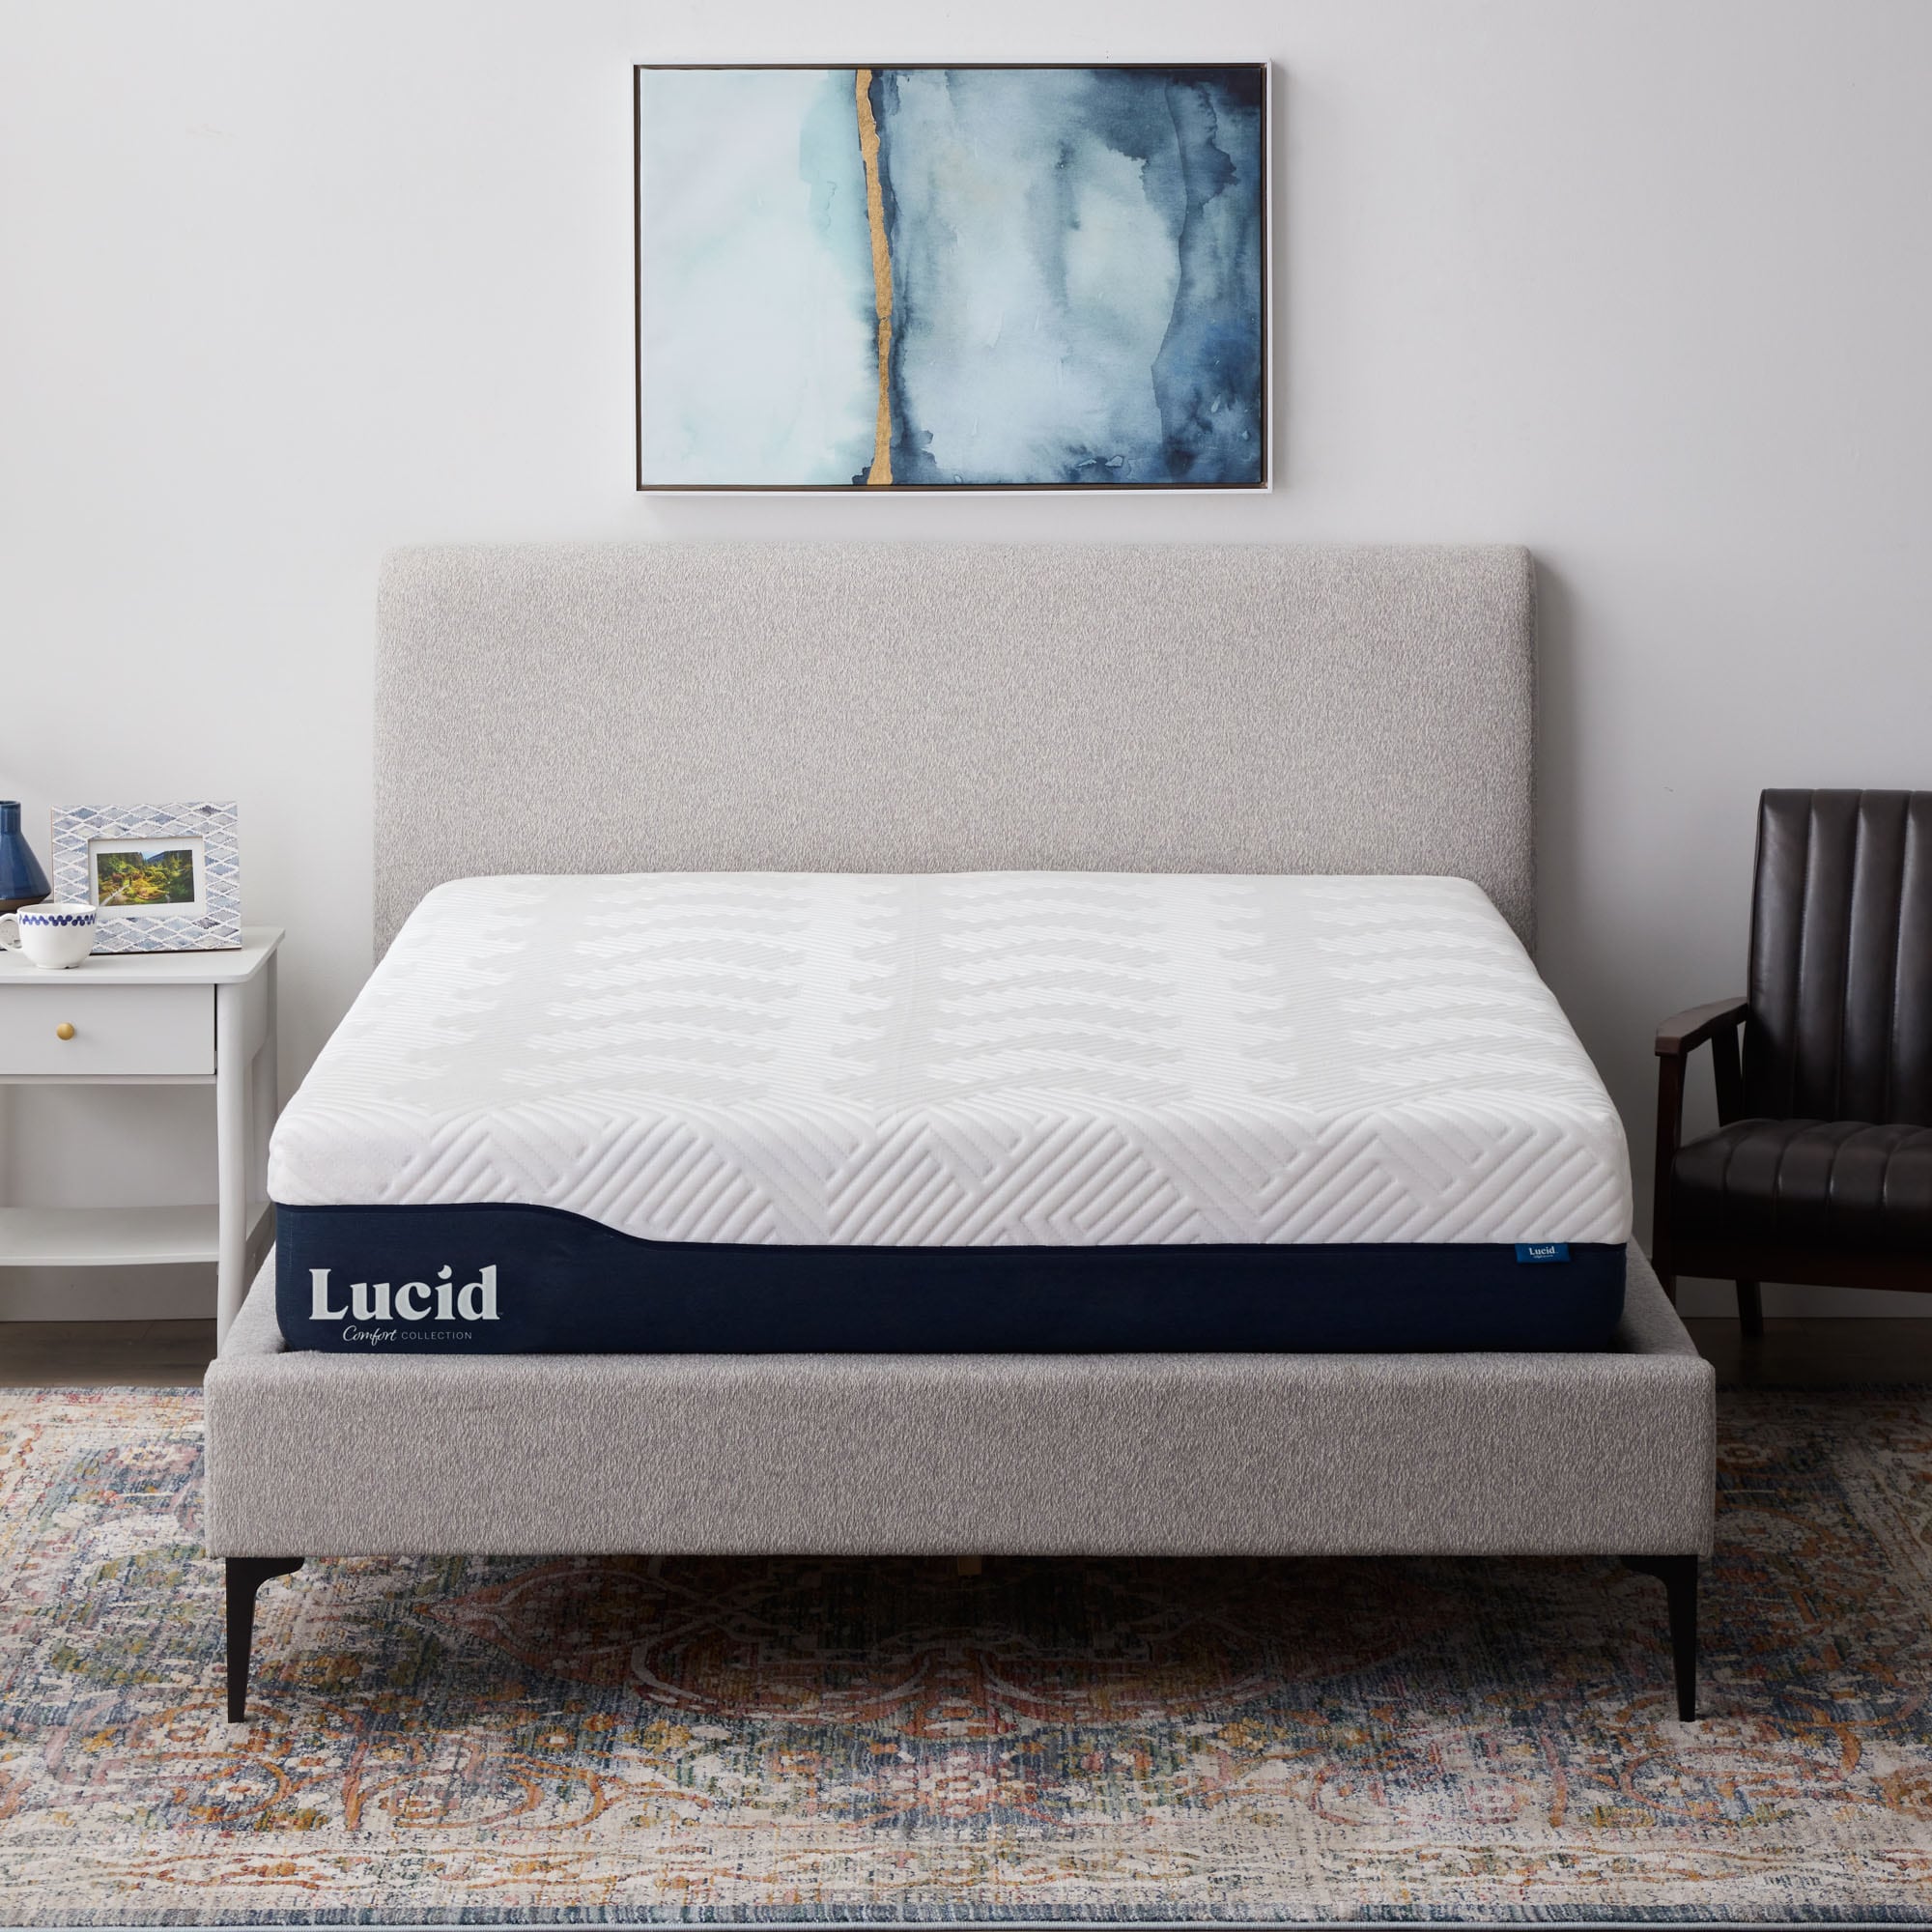 Gel and Aloe Vera 12-in California King Hybrid Memory Foam/Coil Blend Mattress in a Box in White | - LUCID Comfort Collection LUCC12CK38GH